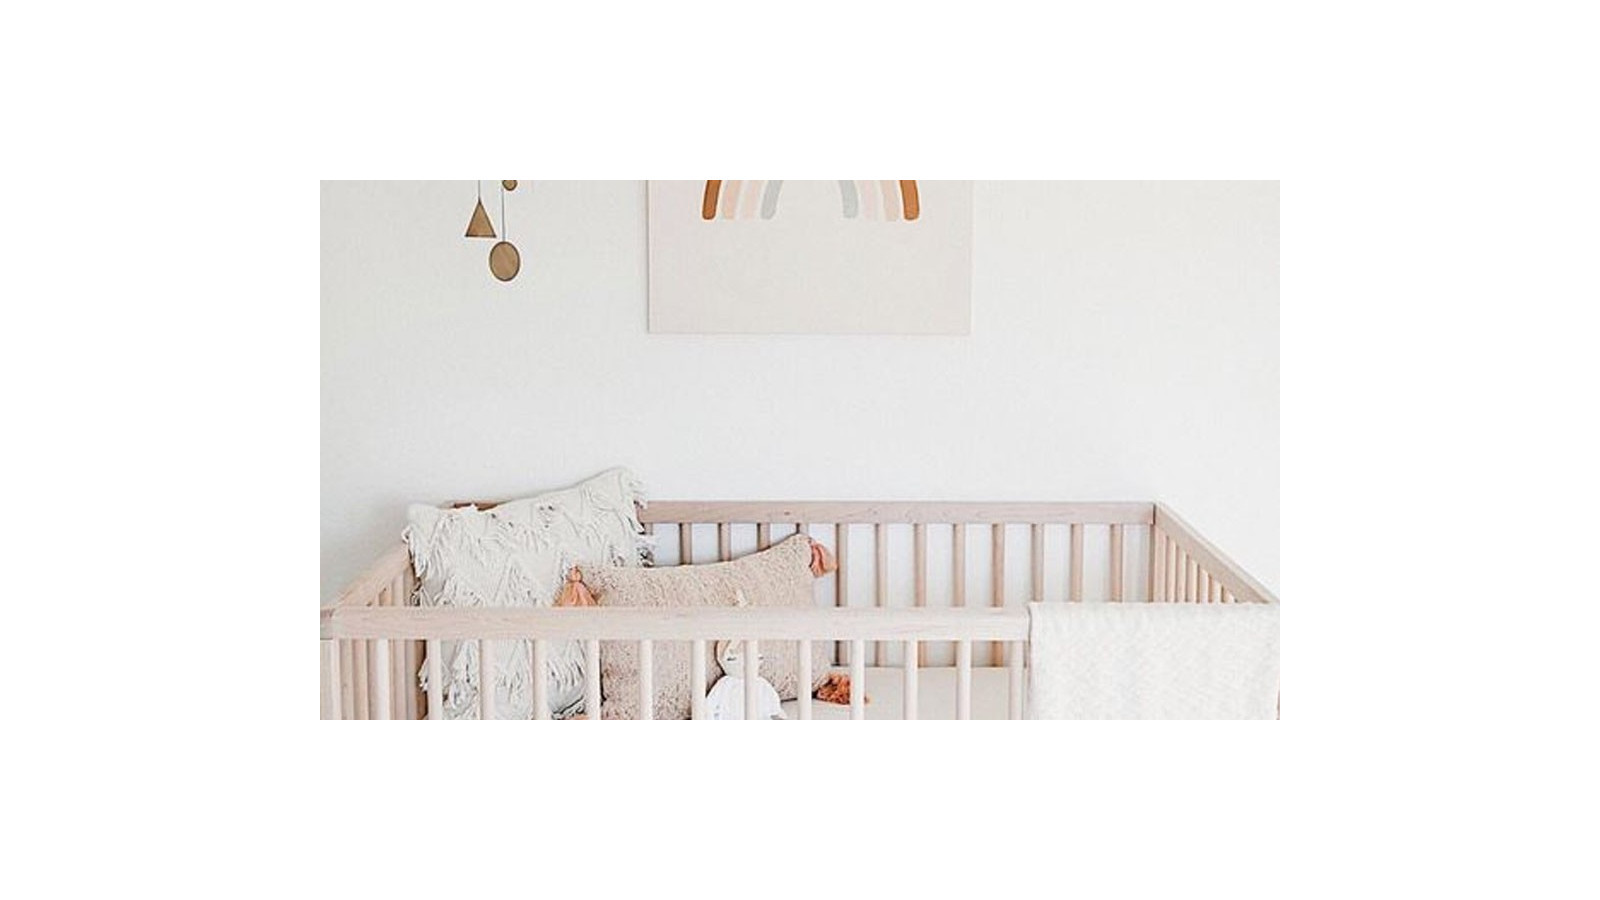 Choice of furniture for the nursery